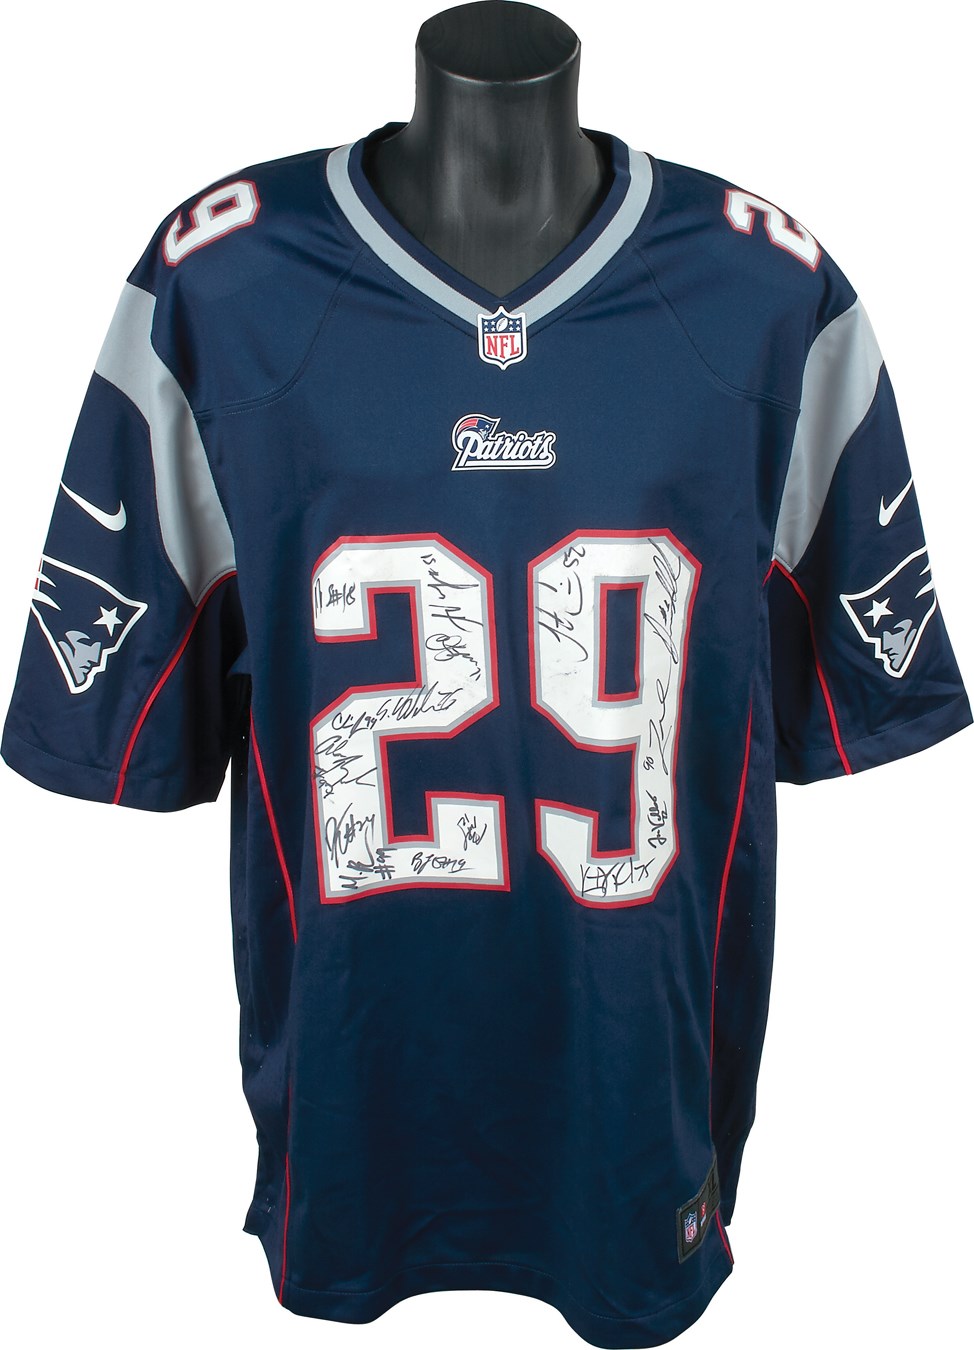 - "Deflategate" Super Bowl XLIX Champion New England Patriots Team-Signed Jersey - Gifted to Longtime Team Employee (PSA)